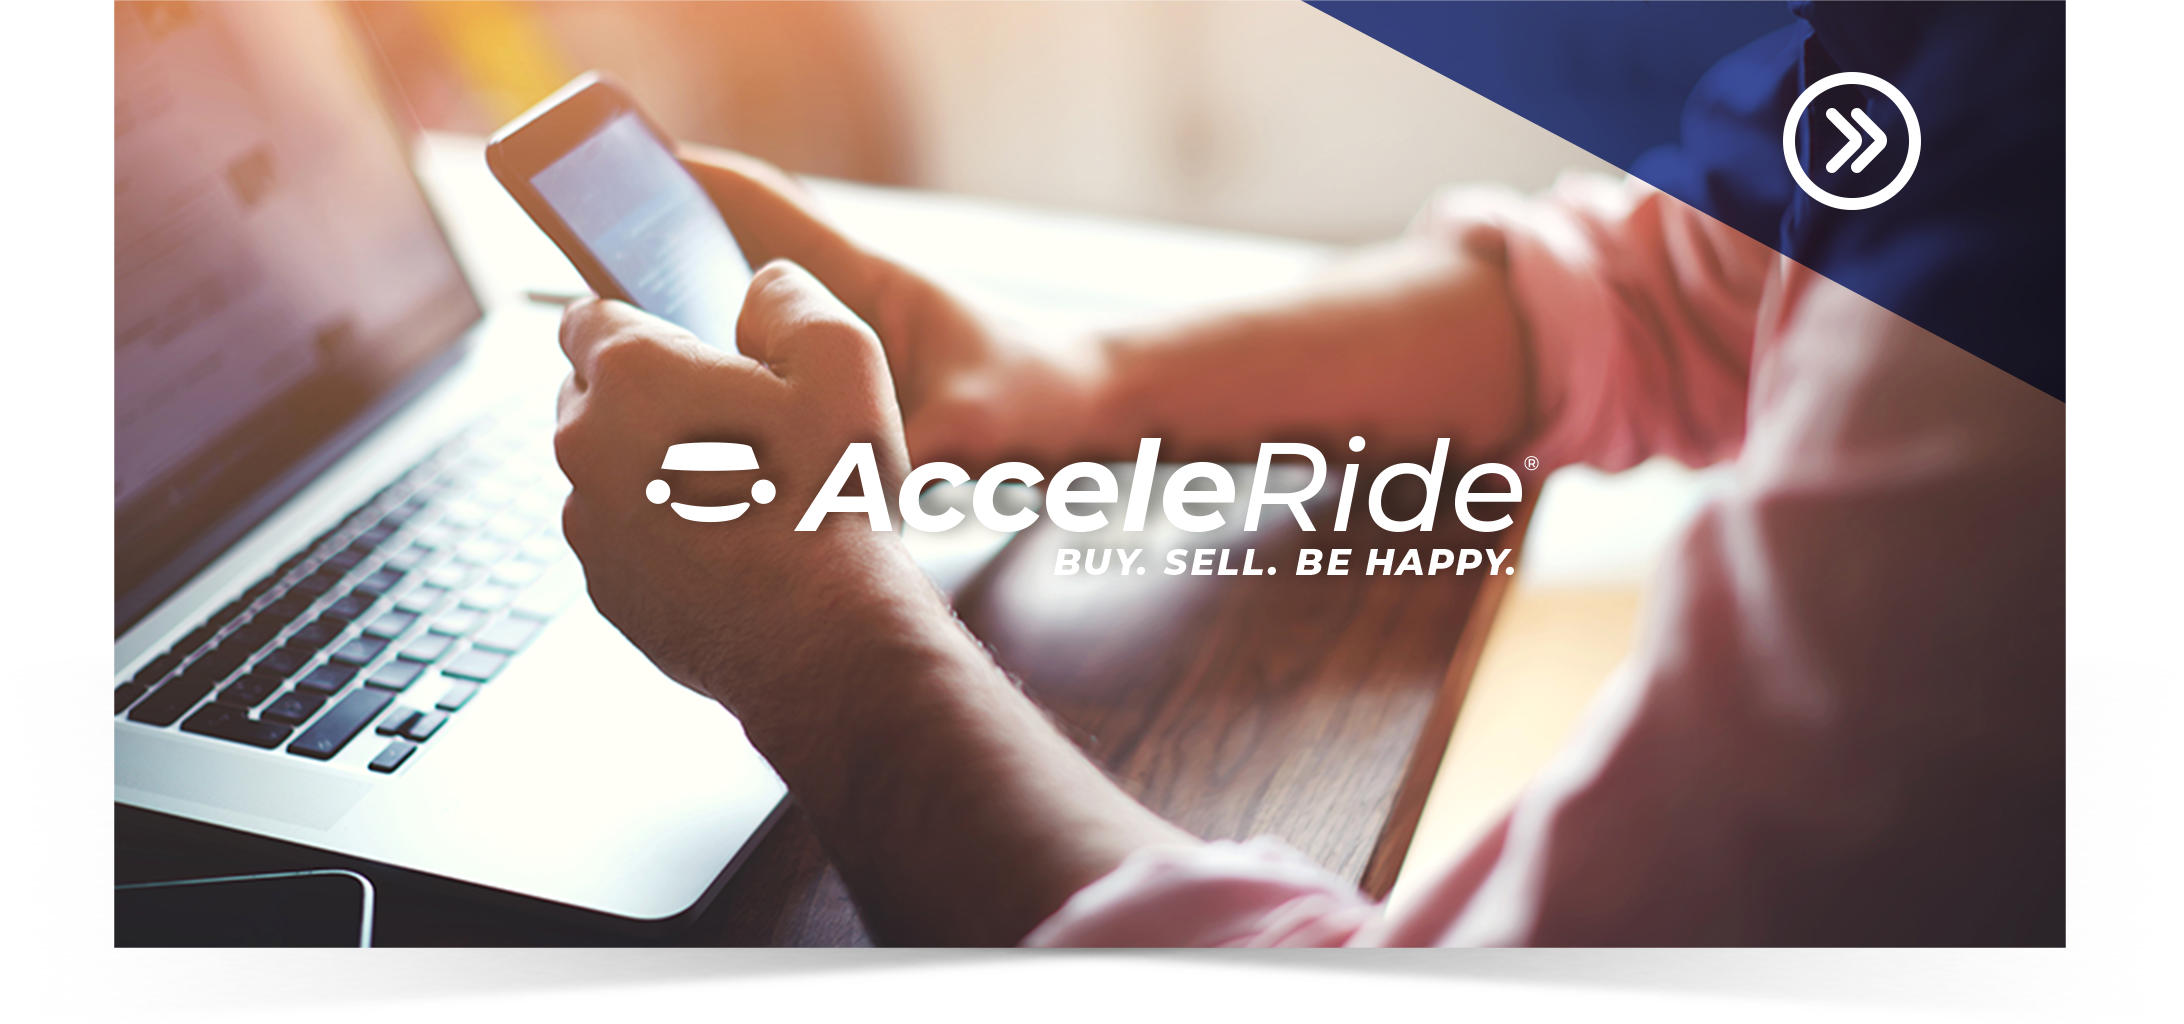 acceleride video section